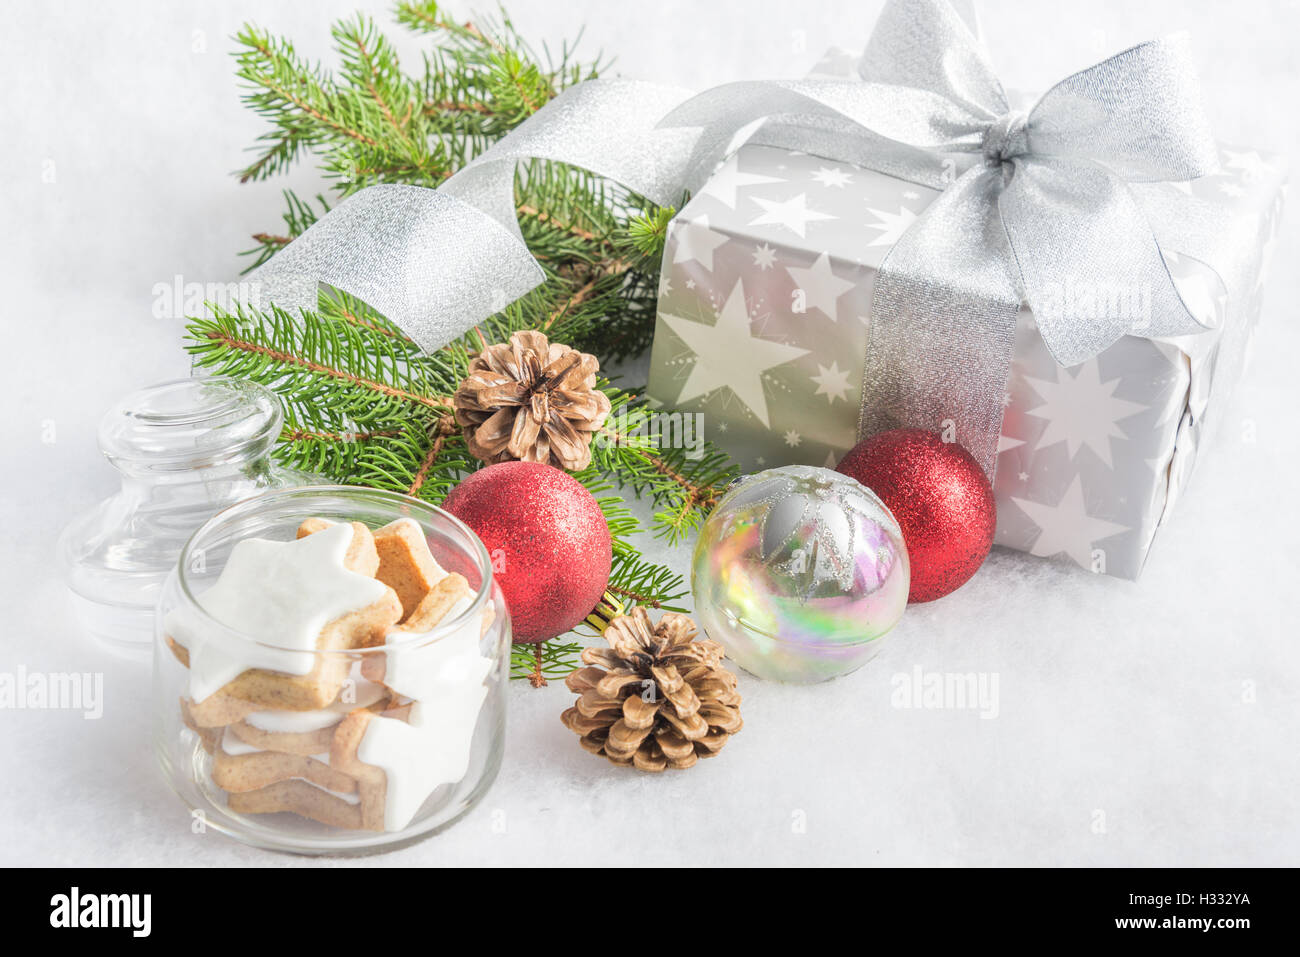 Christmas gift box in silver wrapping paper  over a white fluffy background. A jar full of star cookies and christmas decoration Stock Photo